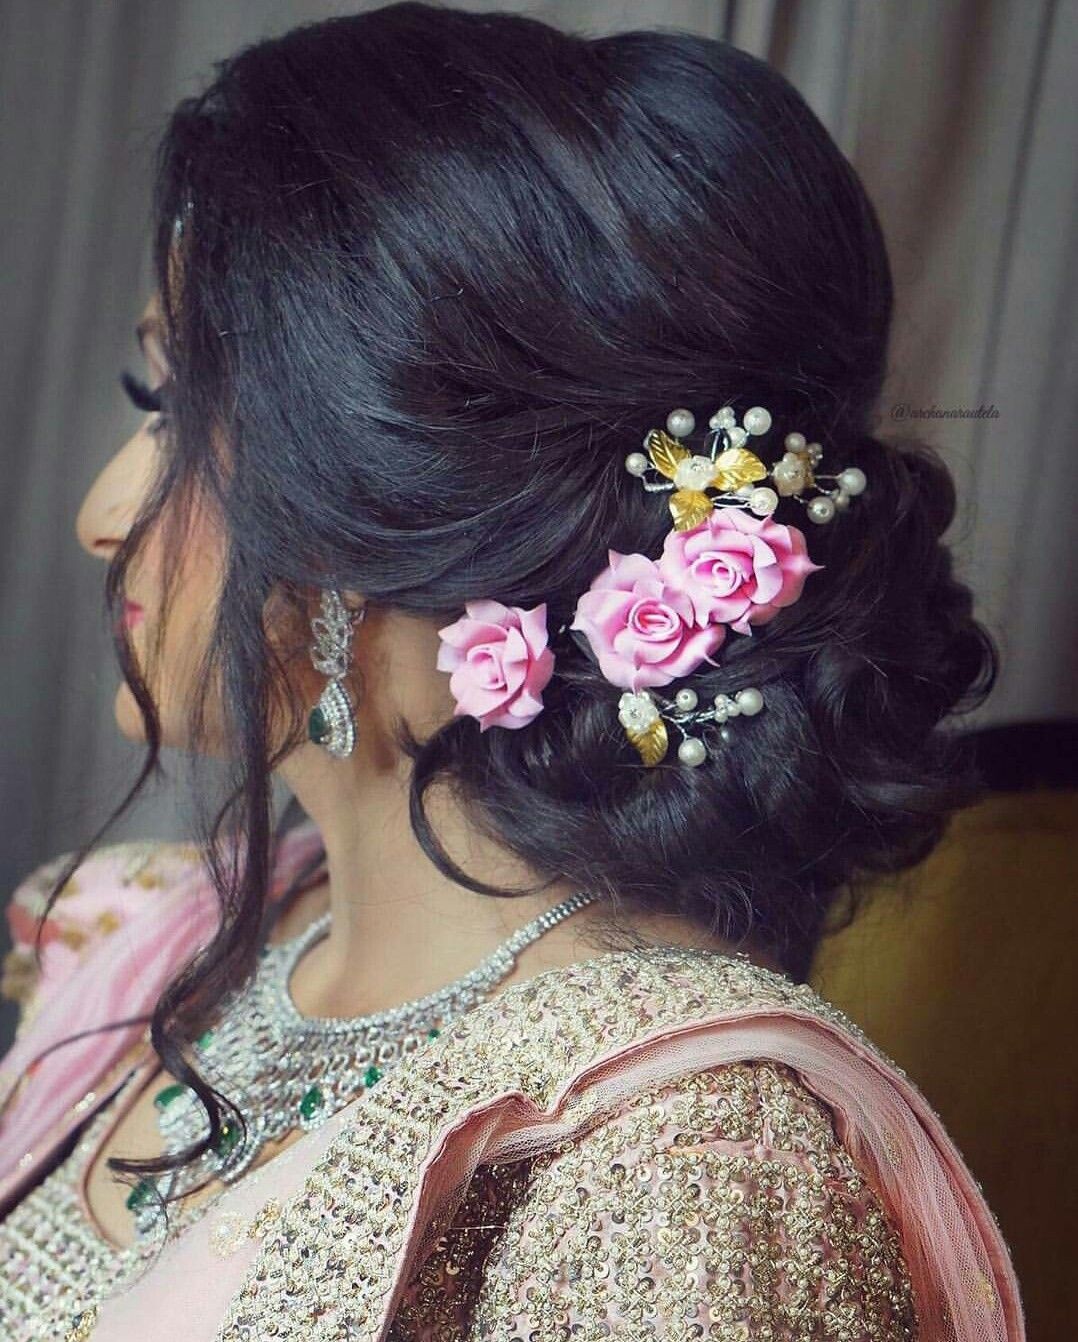 Wedding hairstyles | Wedding up-styles for the bride's big day